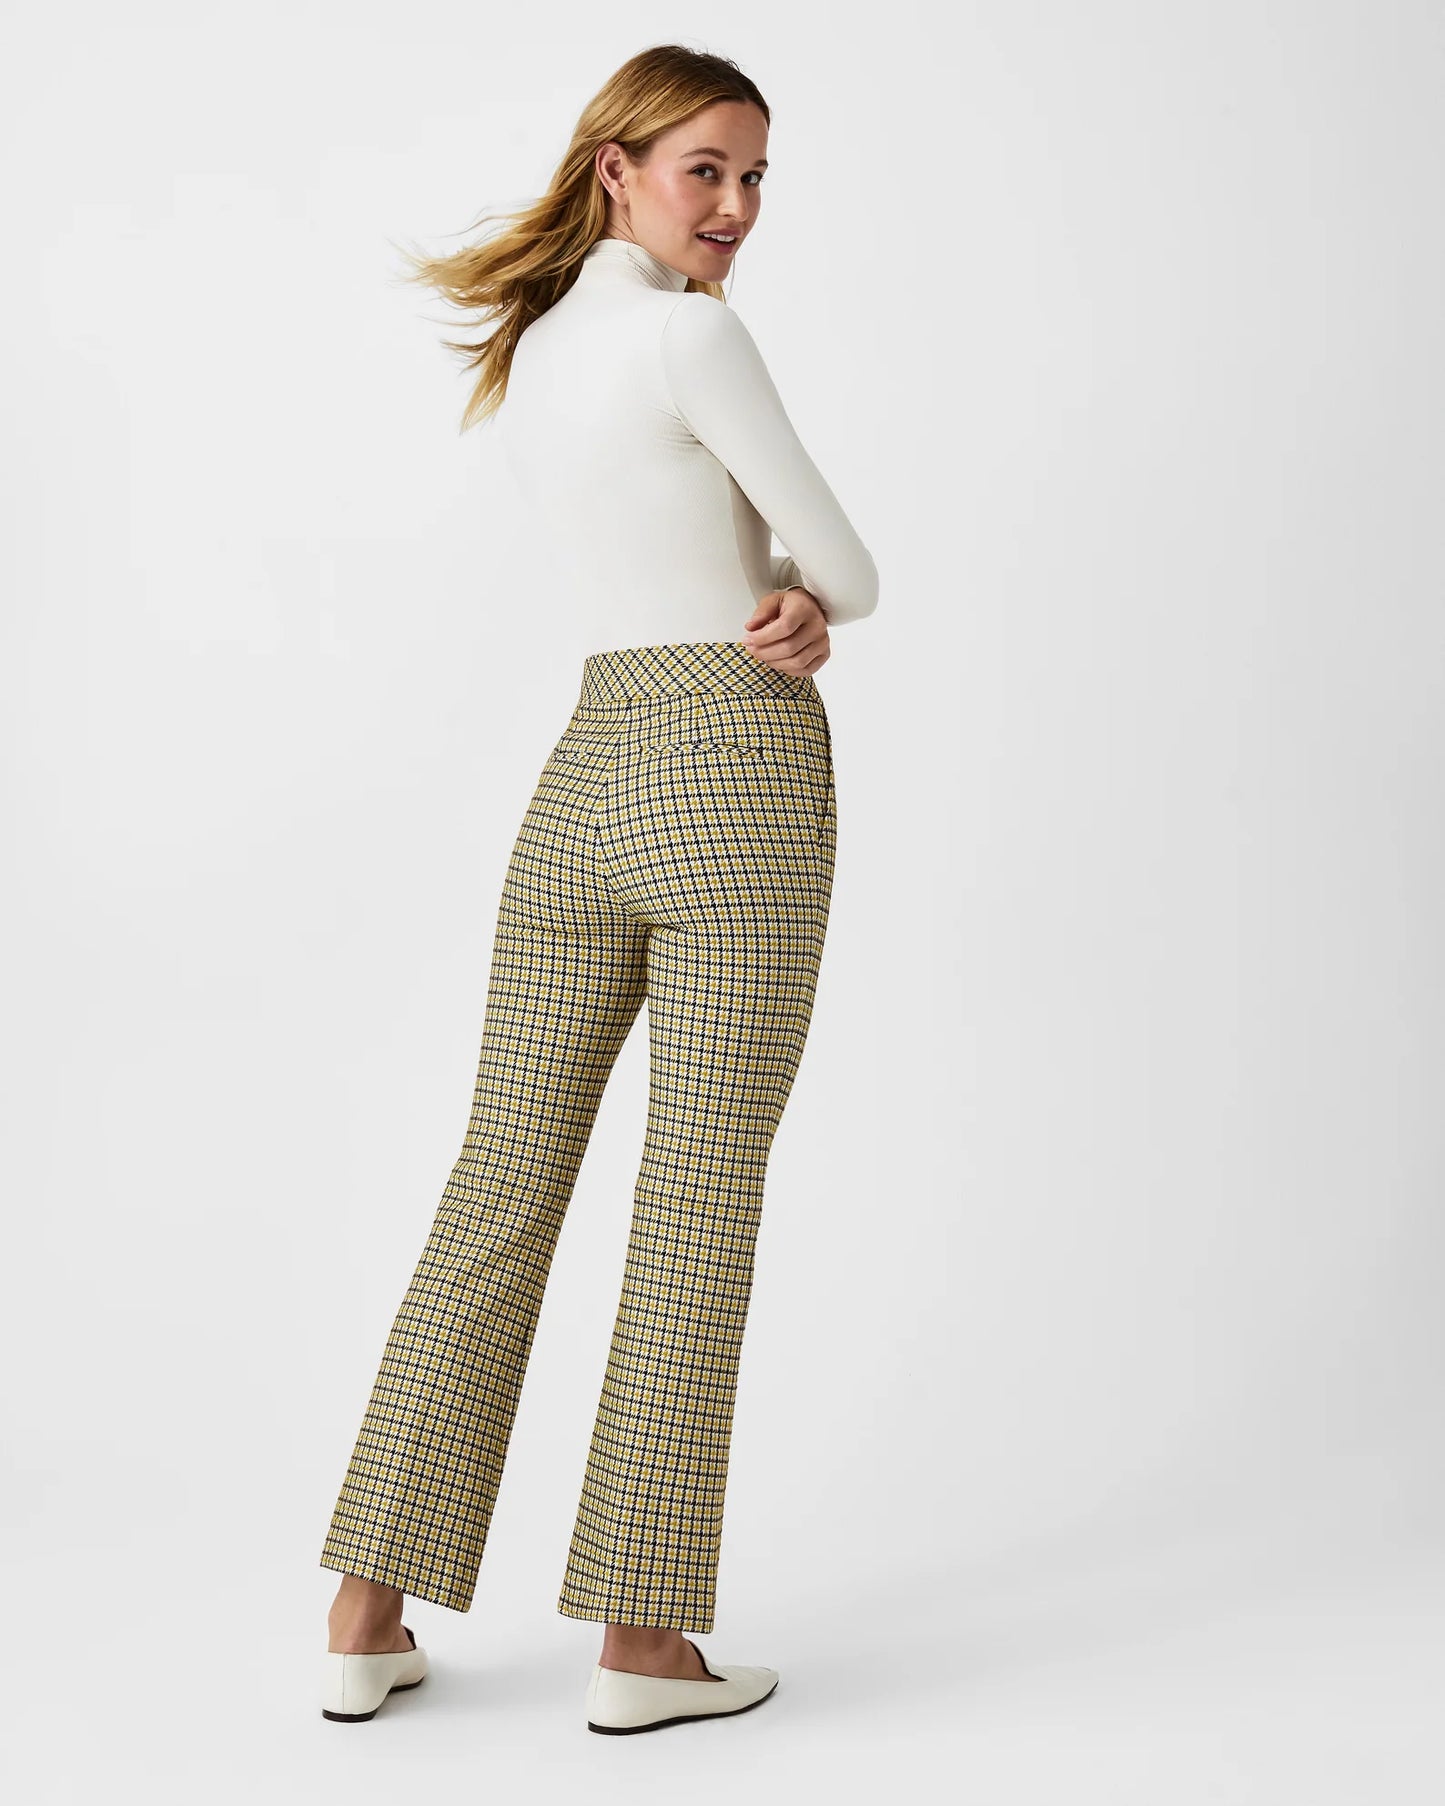 Spanx The Perfect Pant Kick Flare | Dijon Houndstooth